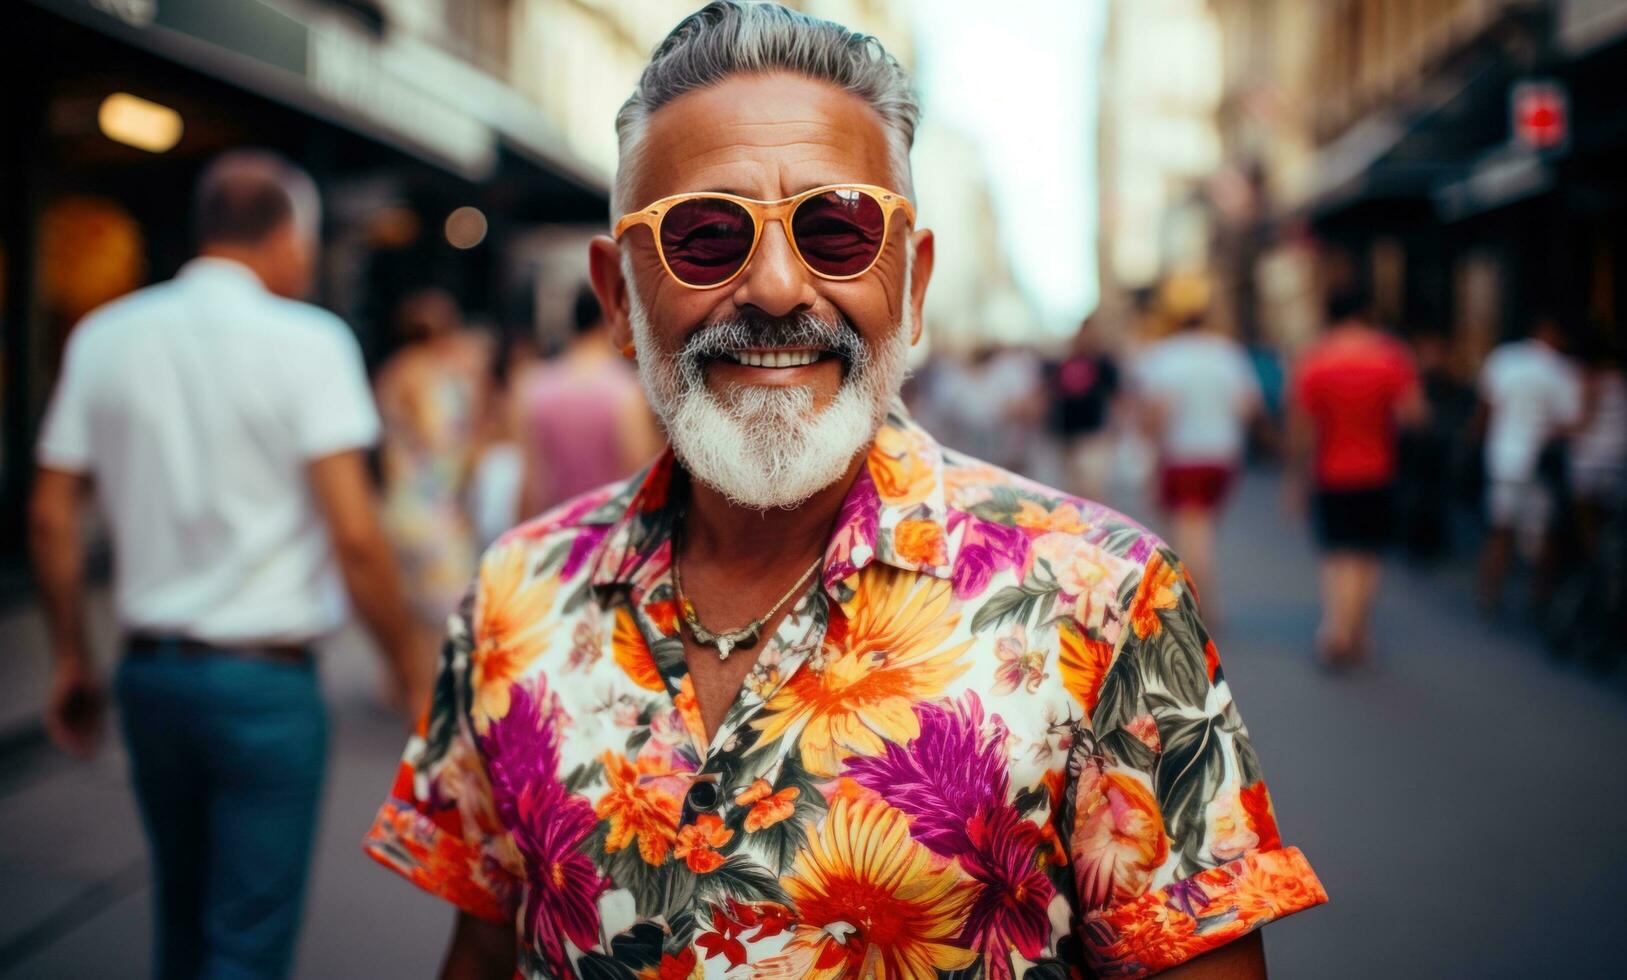 AI generated an older man in a floral shirt standing on the street photo